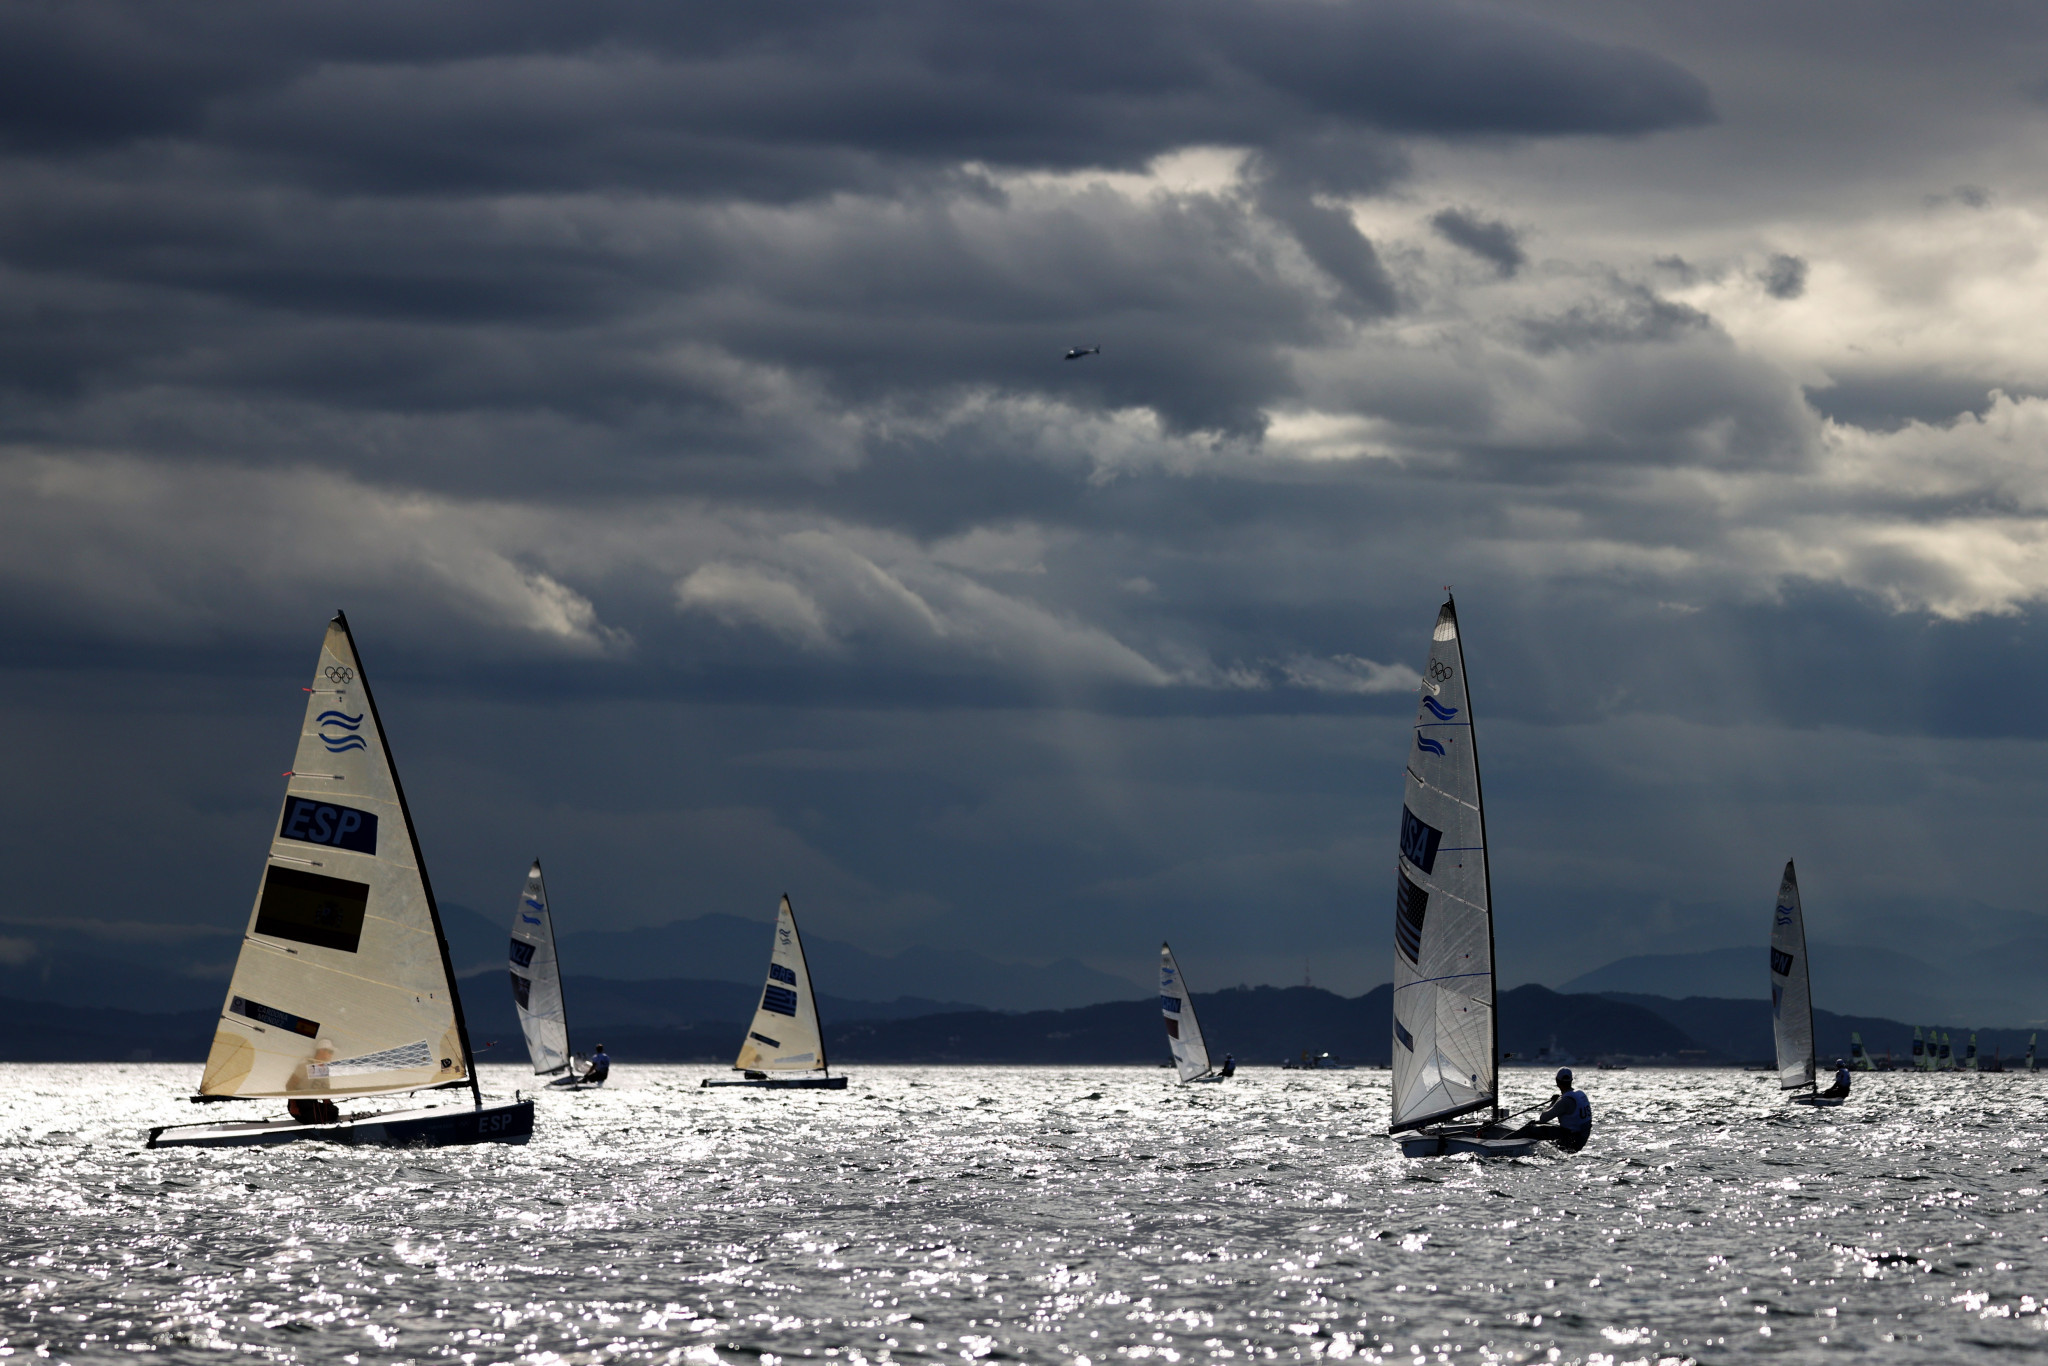 World Sailing is moving forward with governance reforms proposed by its Board ©Getty Images